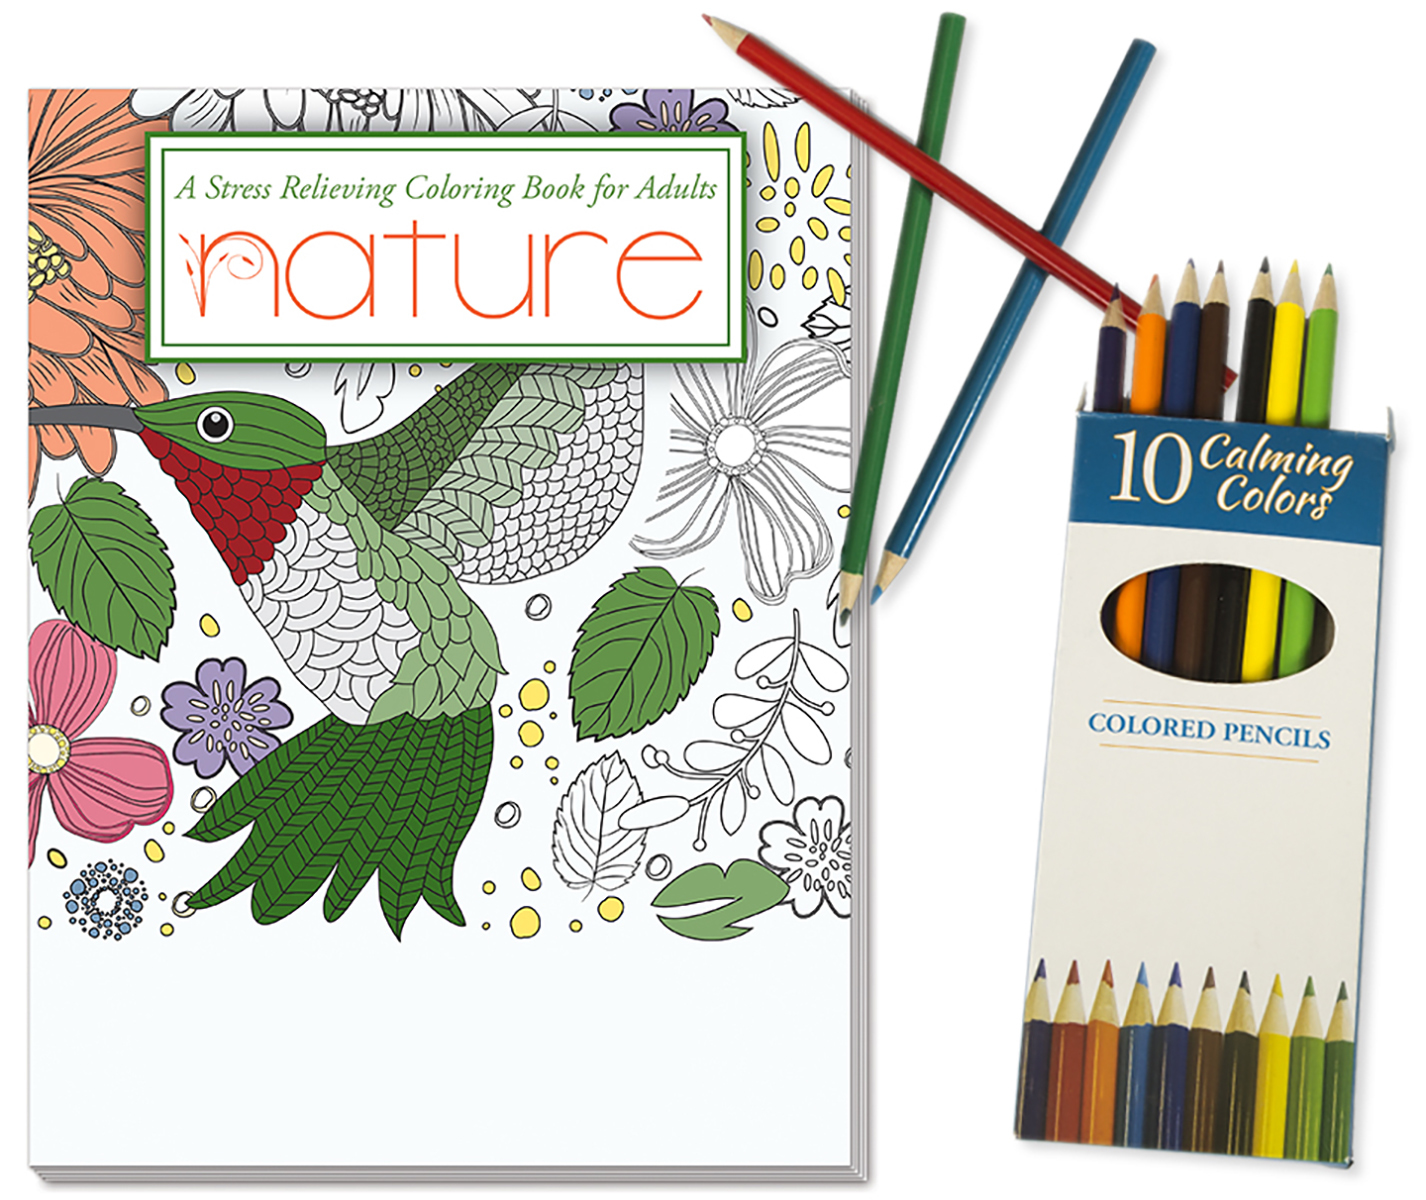 Bulk Adult Coloring Book Sets - 24 Pages, Colored Pencils - DollarDays